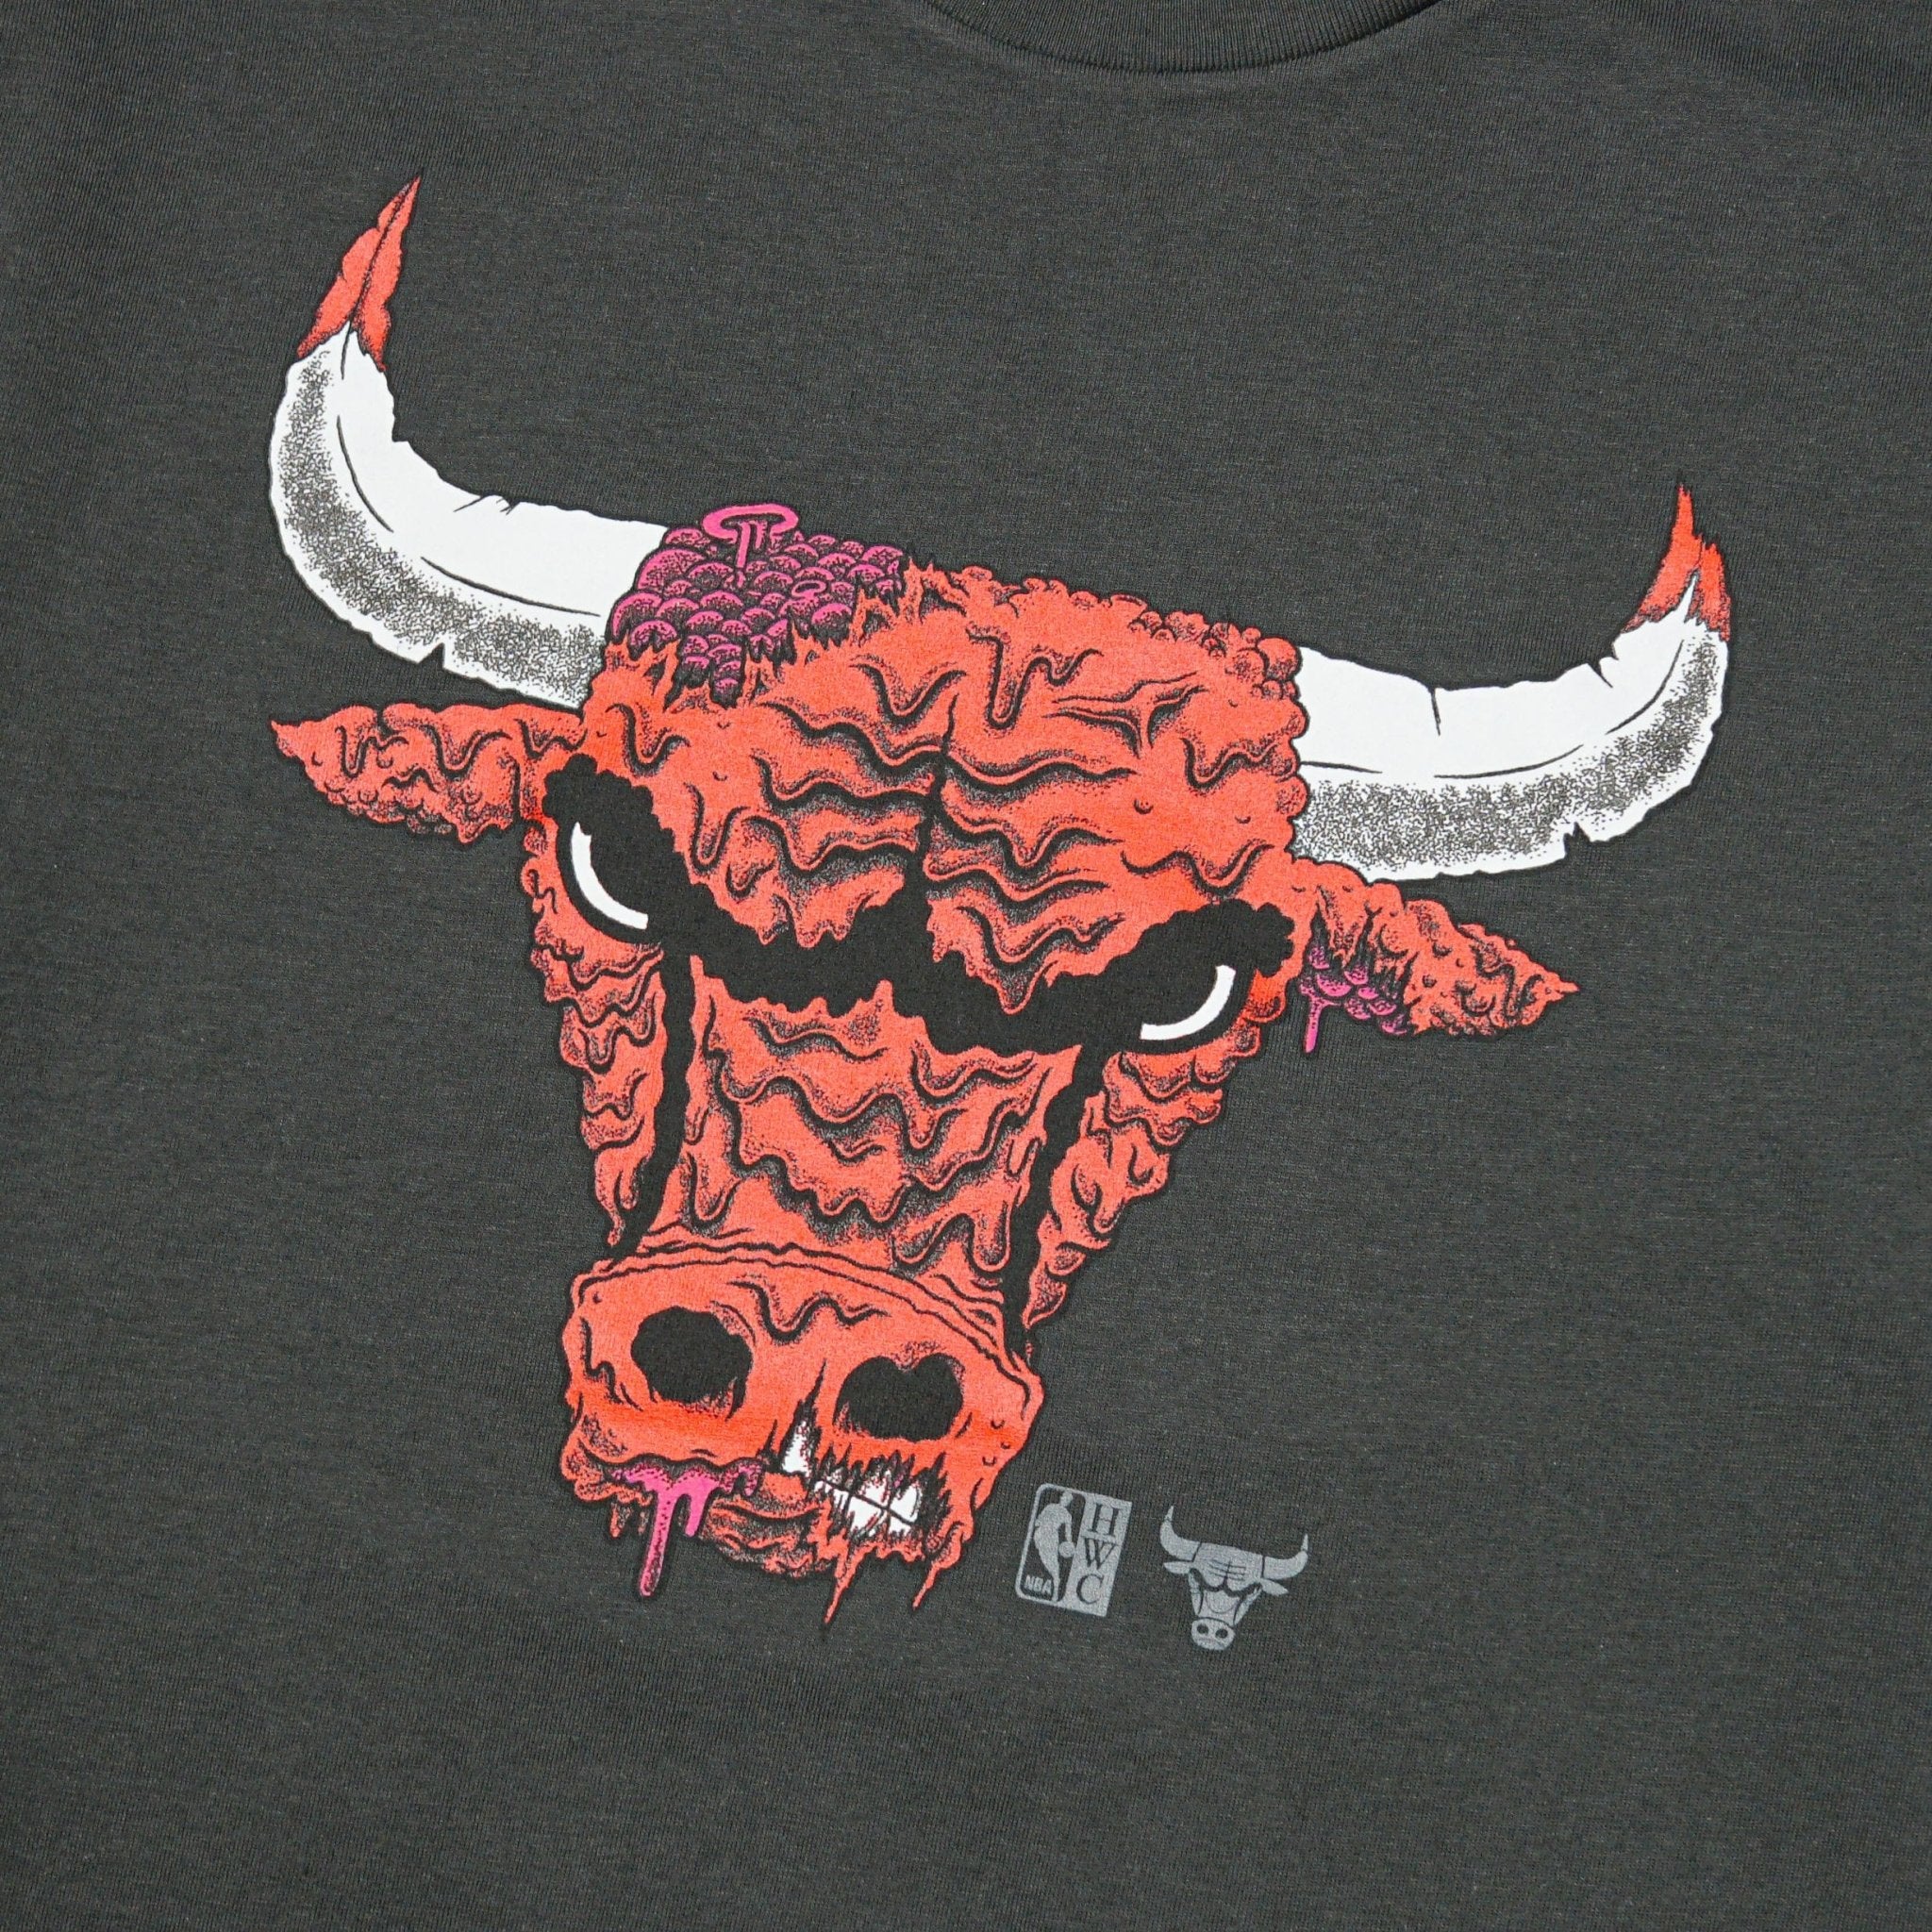 Chicago Bulls Deconstructed Tee in vintage black - Mitchell & Ness - State Of Flux